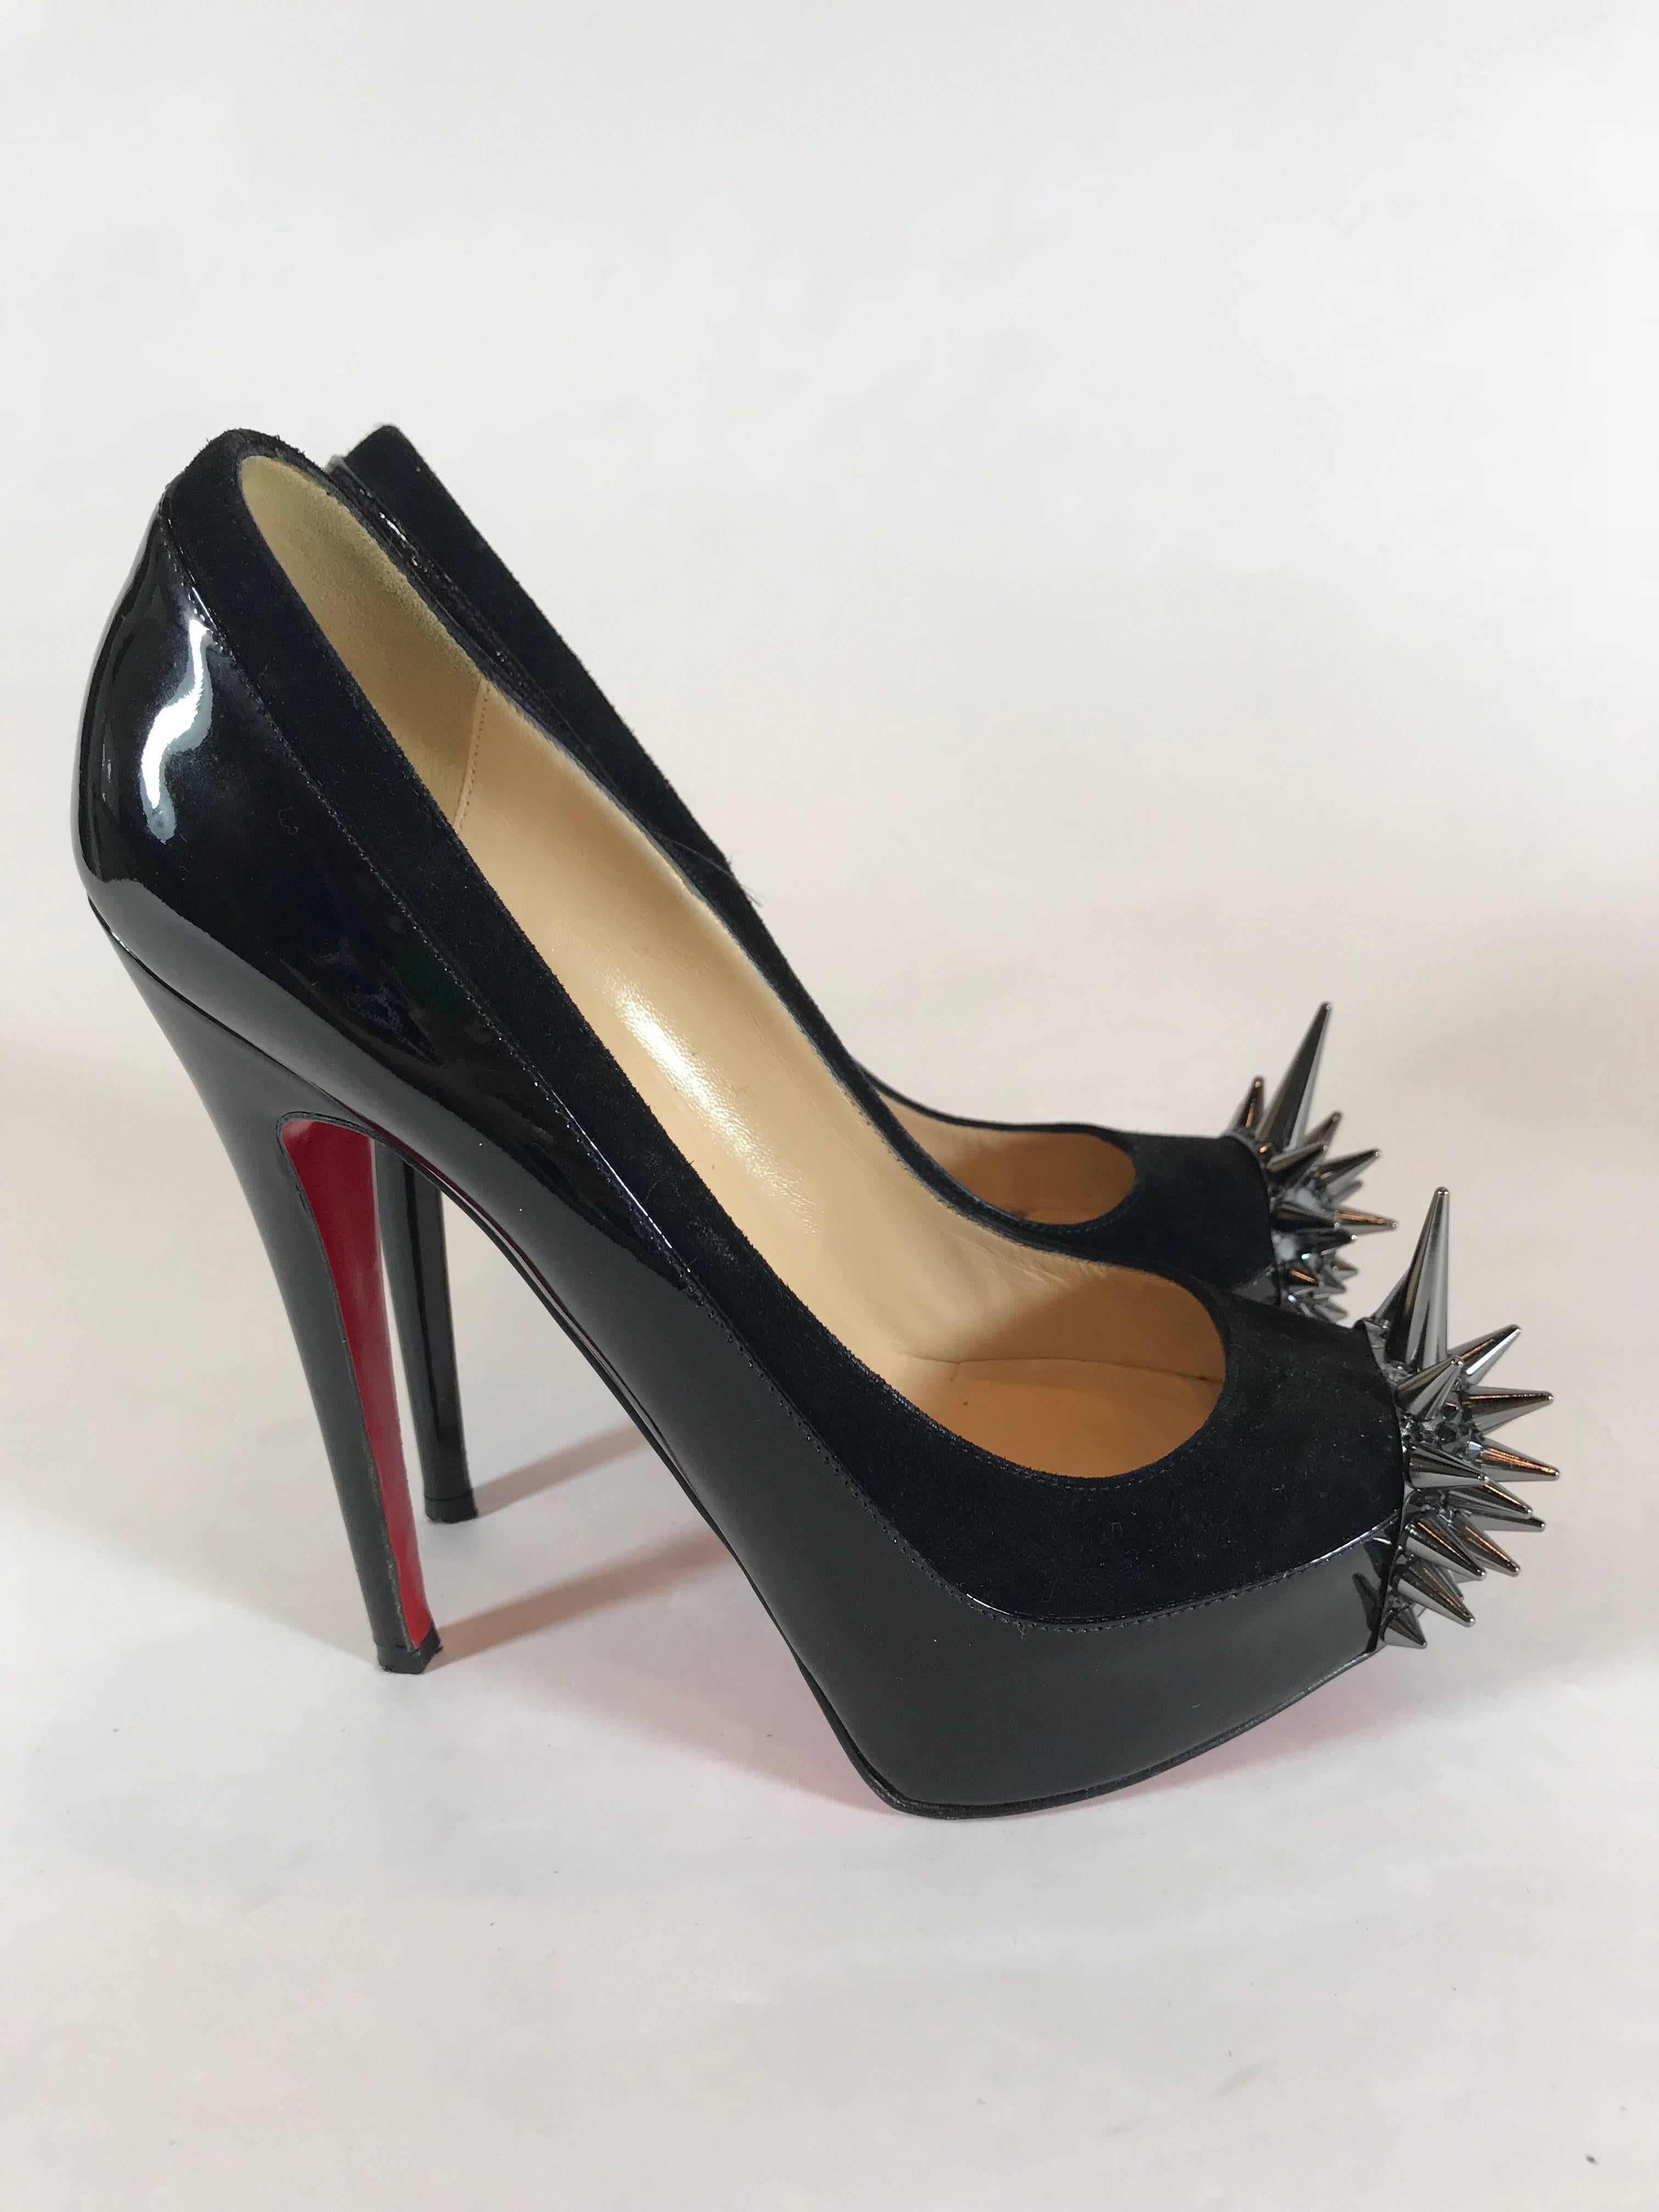 Christian Louboutin Asteroid Spike-Toe Pump In Excellent Condition For Sale In Roslyn, NY